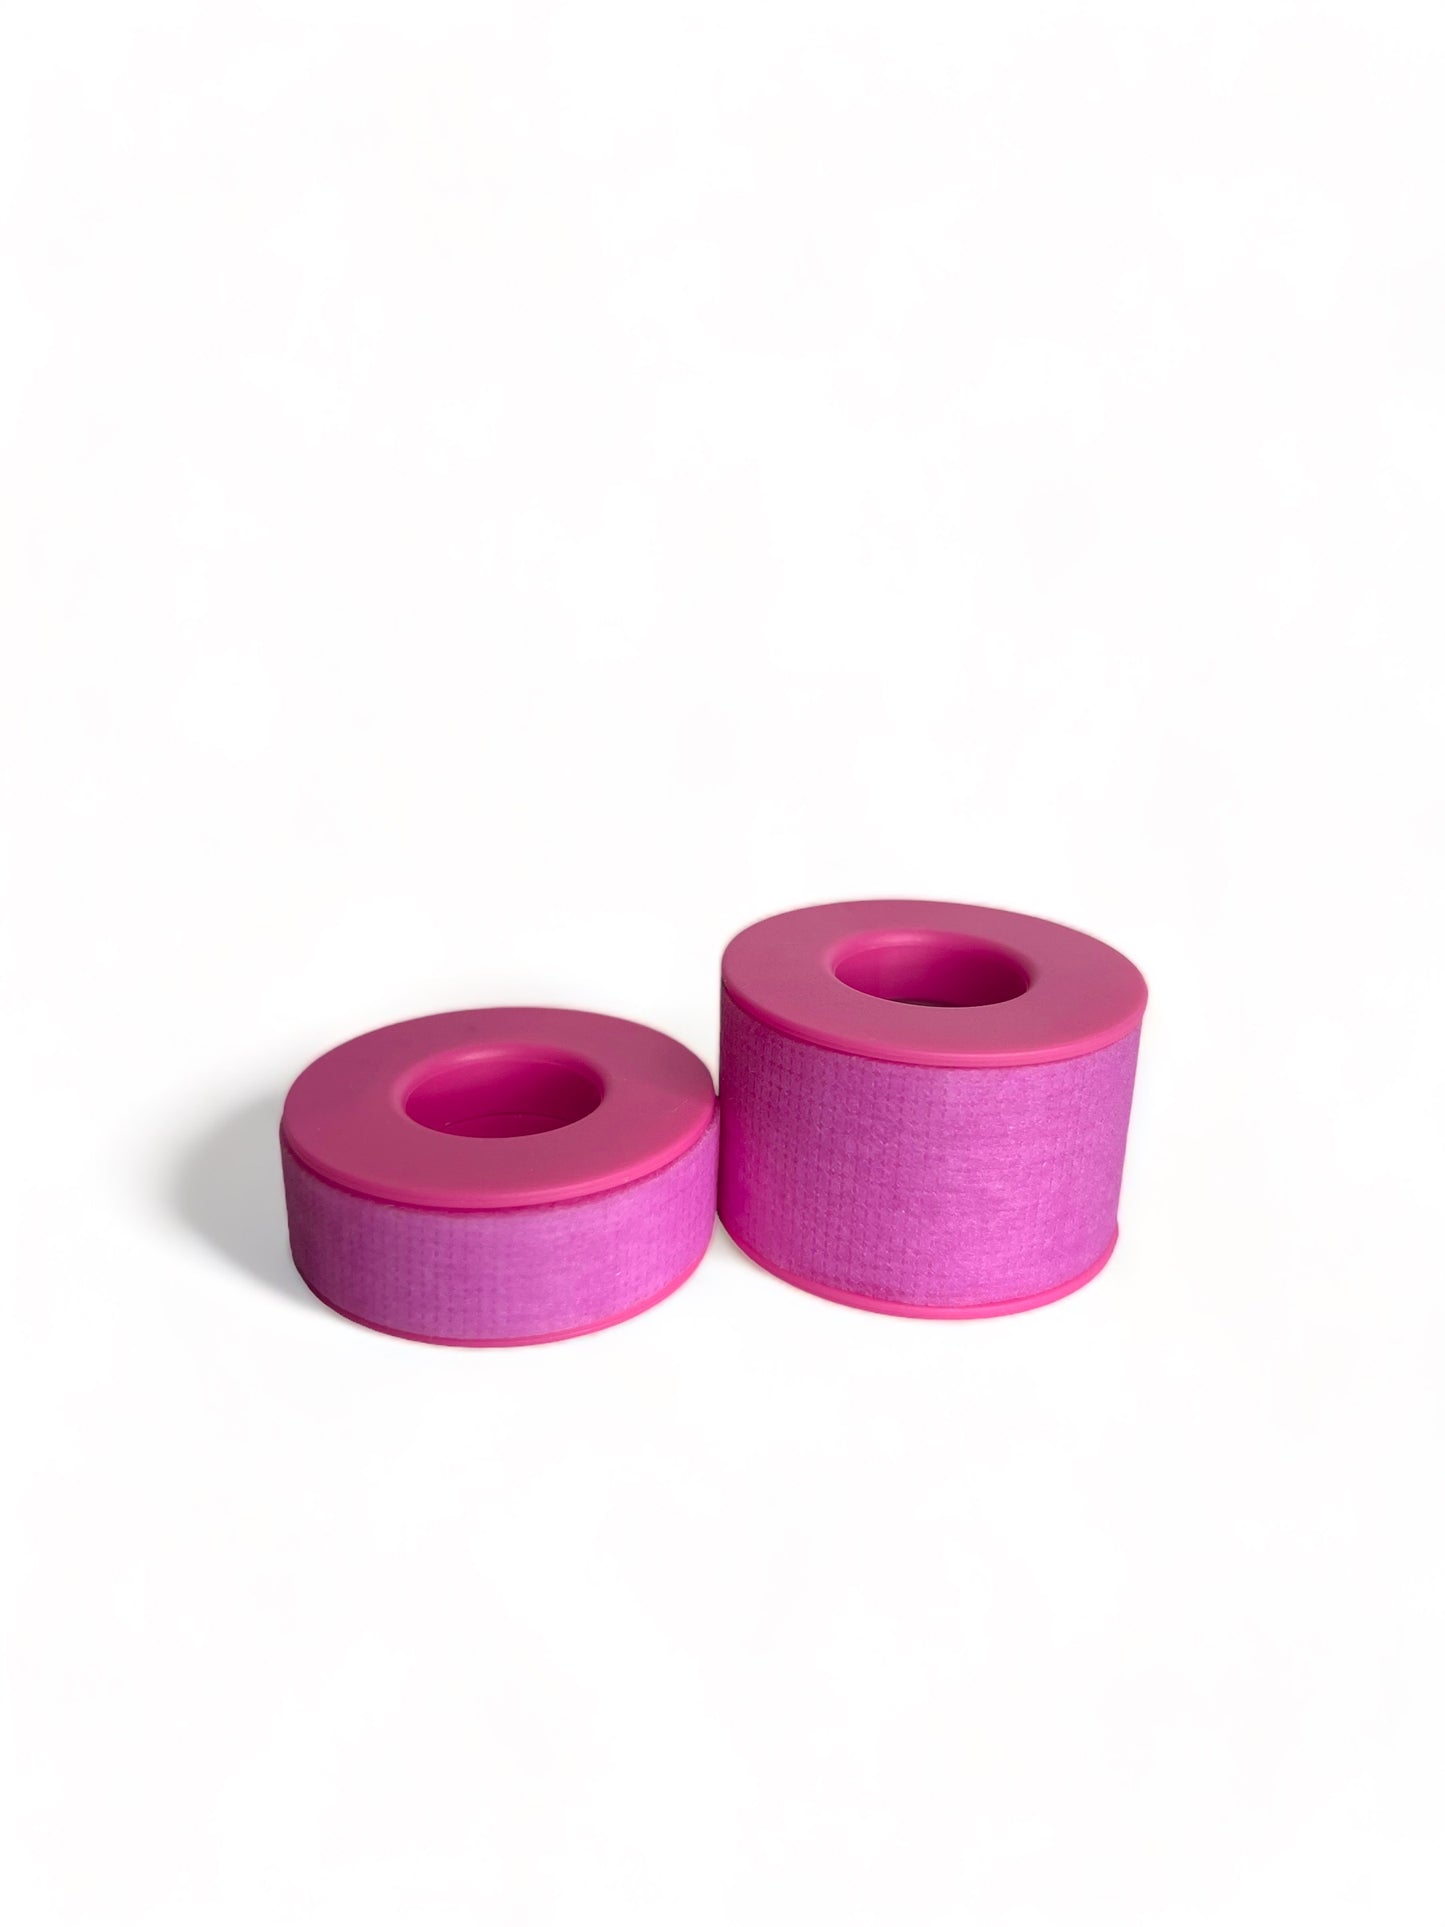 NEW Silicone Gel Tape